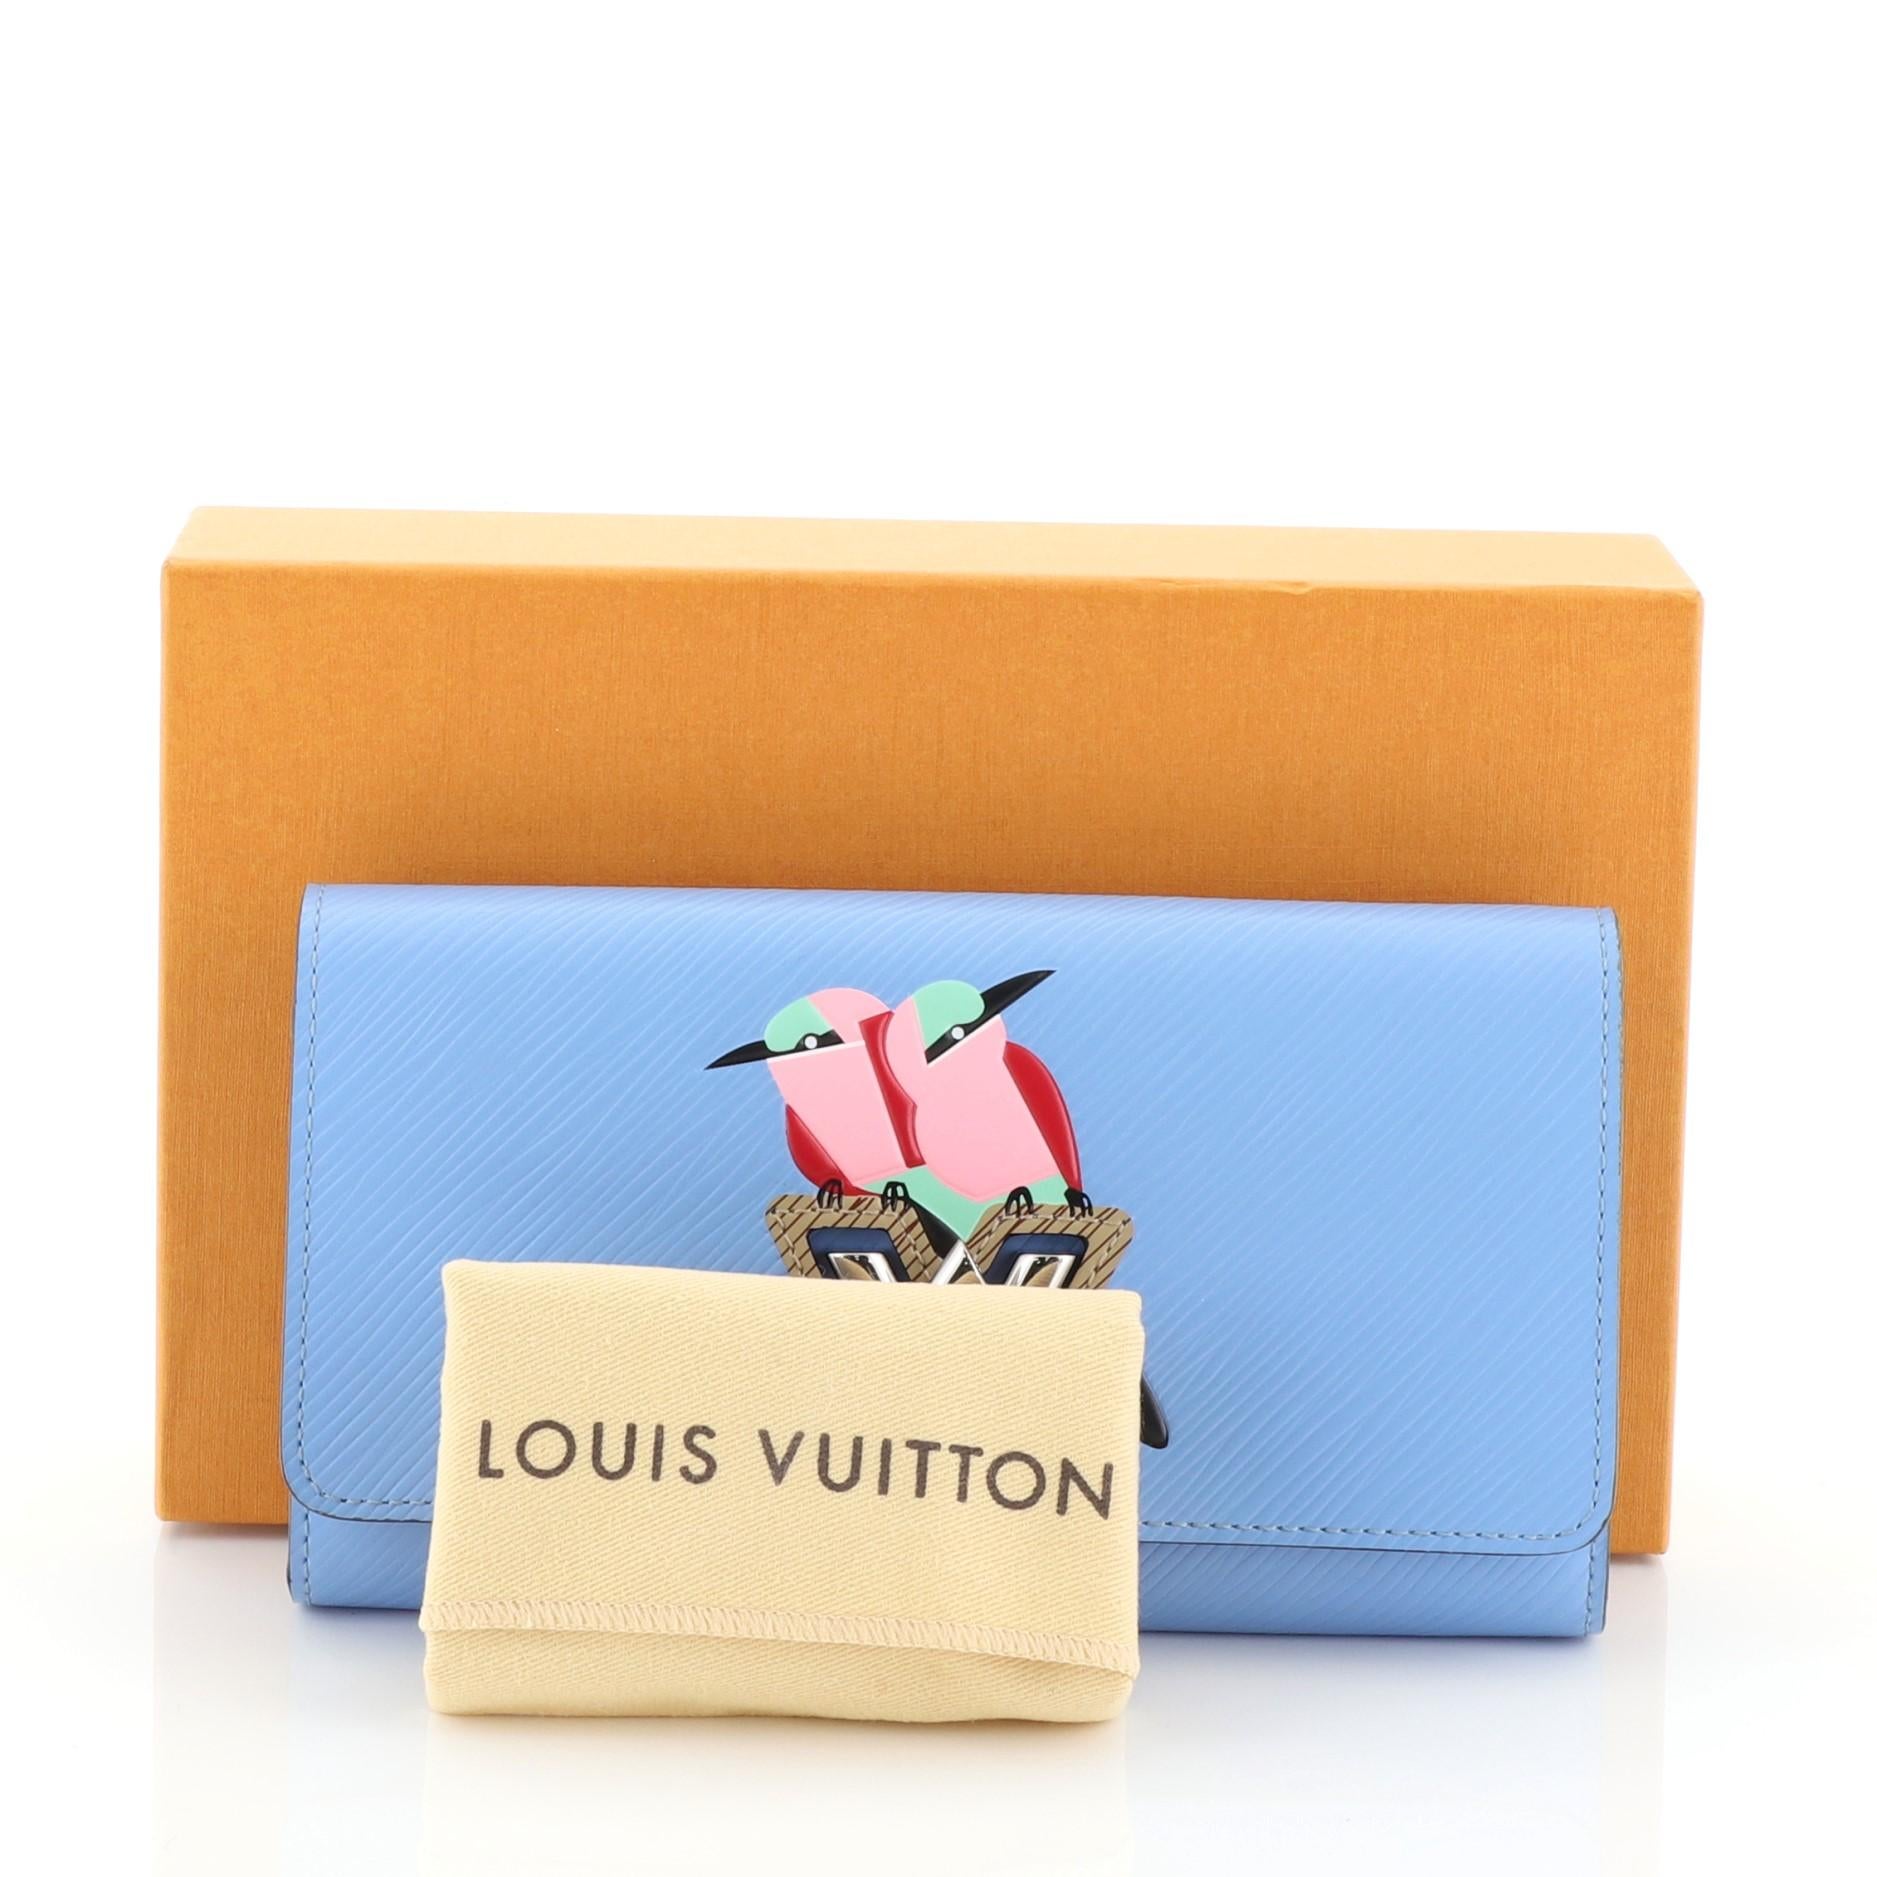 This Louis Vuitton Twist Wallet Bird Motif Epi Leather, crafted in blue epi leather, this wallet features silver LV twist lock, bird motif pattern and silver hardware. Its twist-lock closure opens to a blue leather interior with multiple credit card